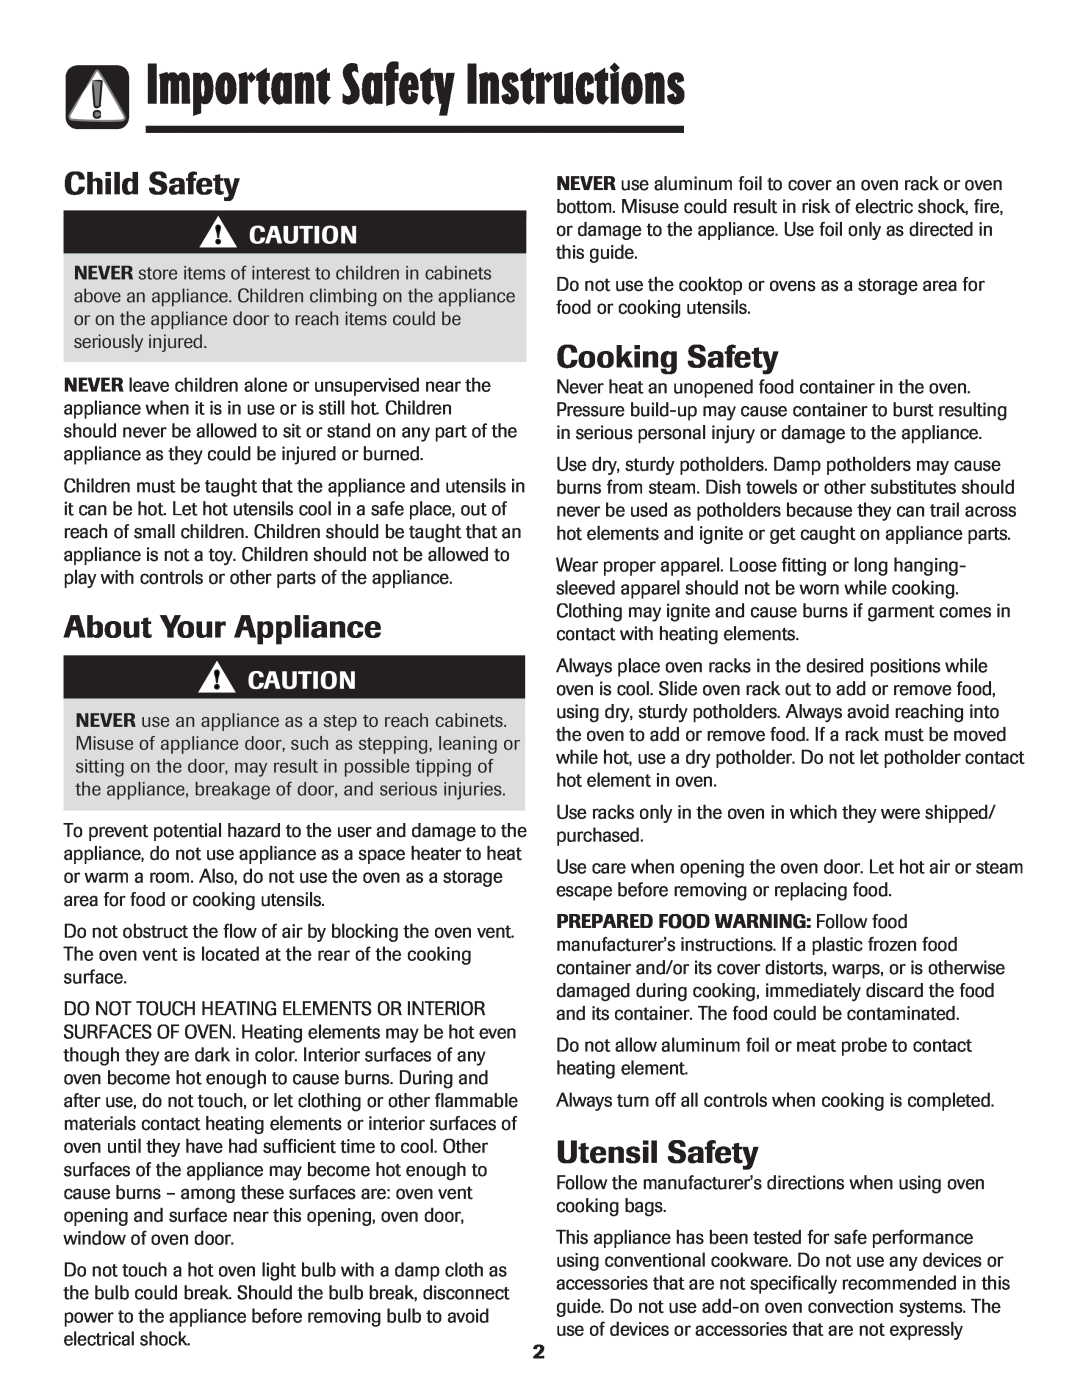 Magic Chef MEP5775BAF Important Safety Instructions, Child Safety, About Your Appliance, Cooking Safety, Utensil Safety 